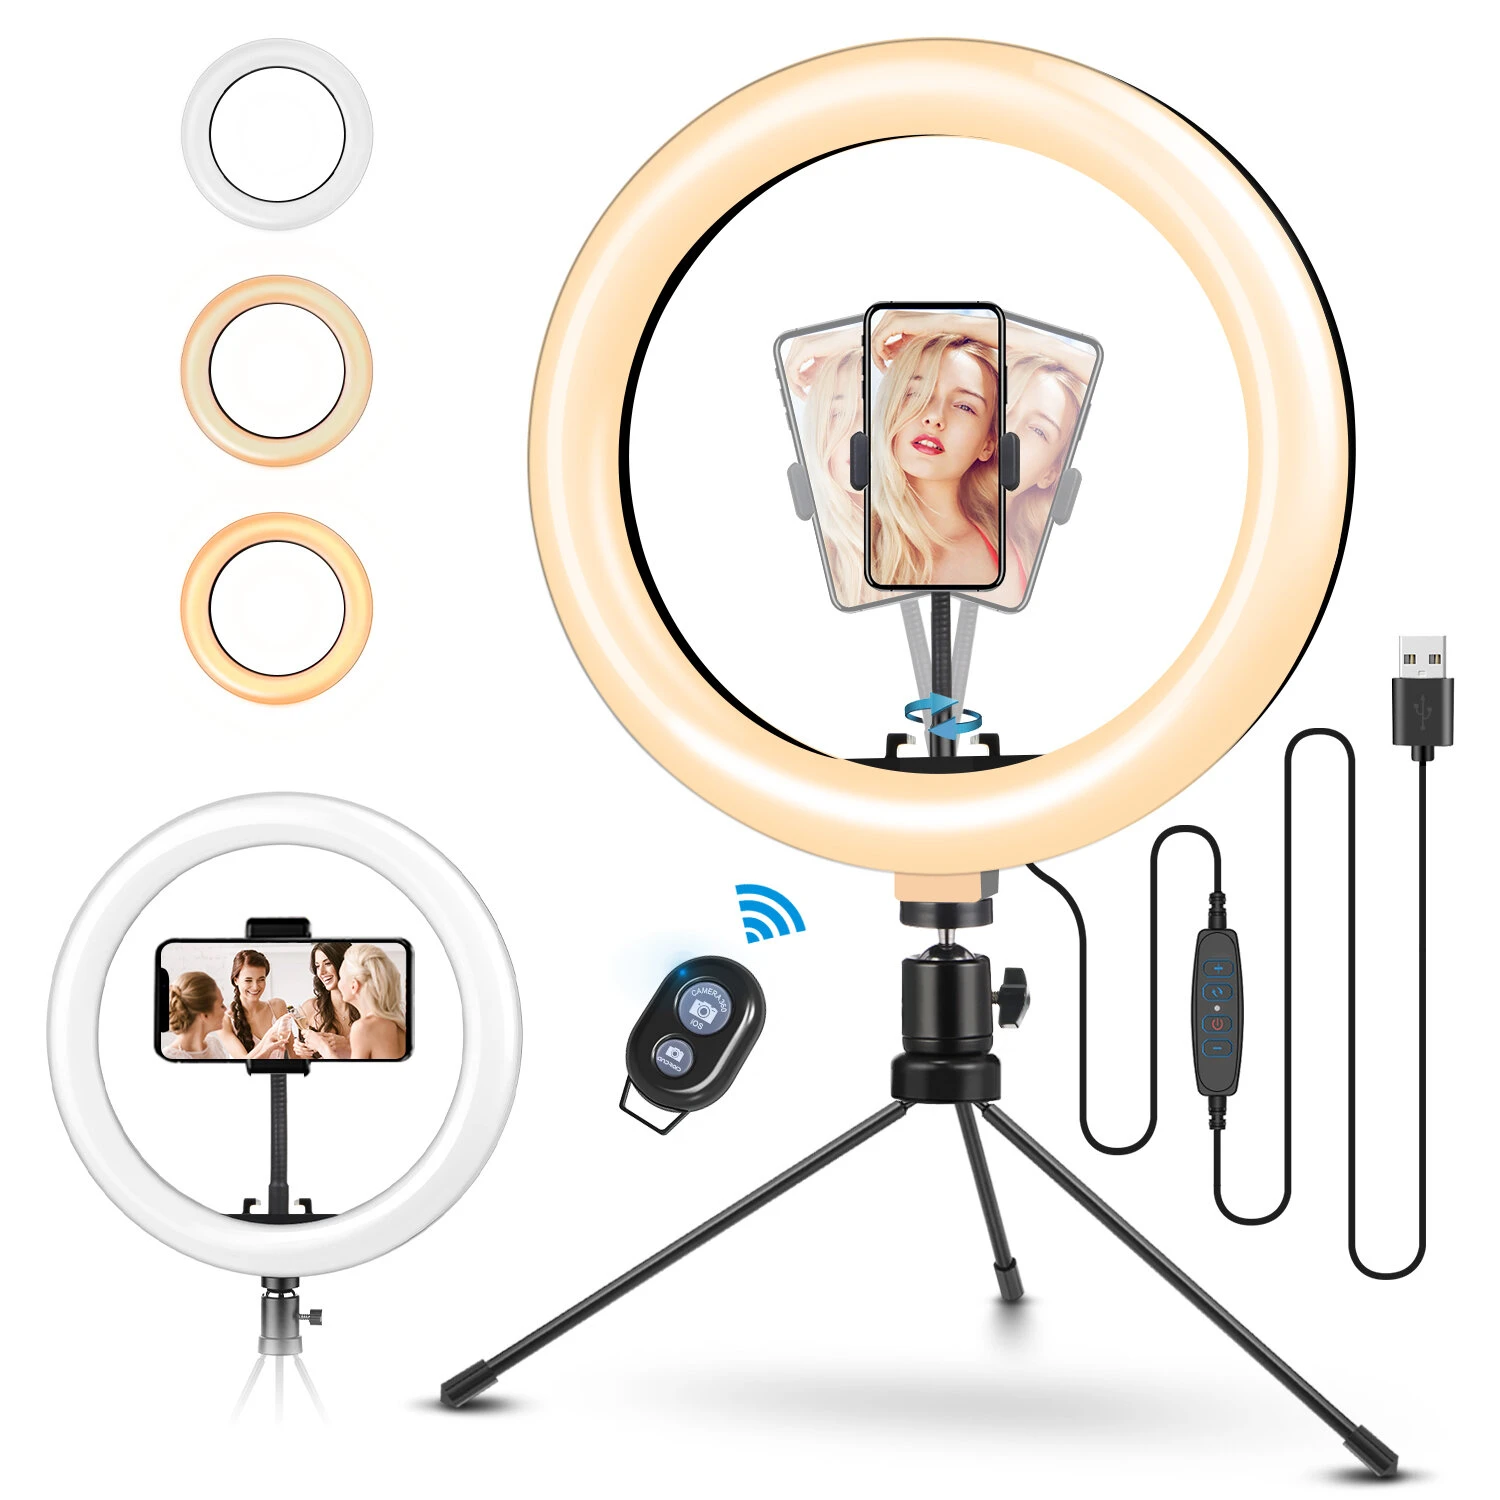 ELEGIANT EGL-02S 10 inch 3 Color Modes Dimmable LED Ring Full Light Tripod Stand Live Selfie $7.99